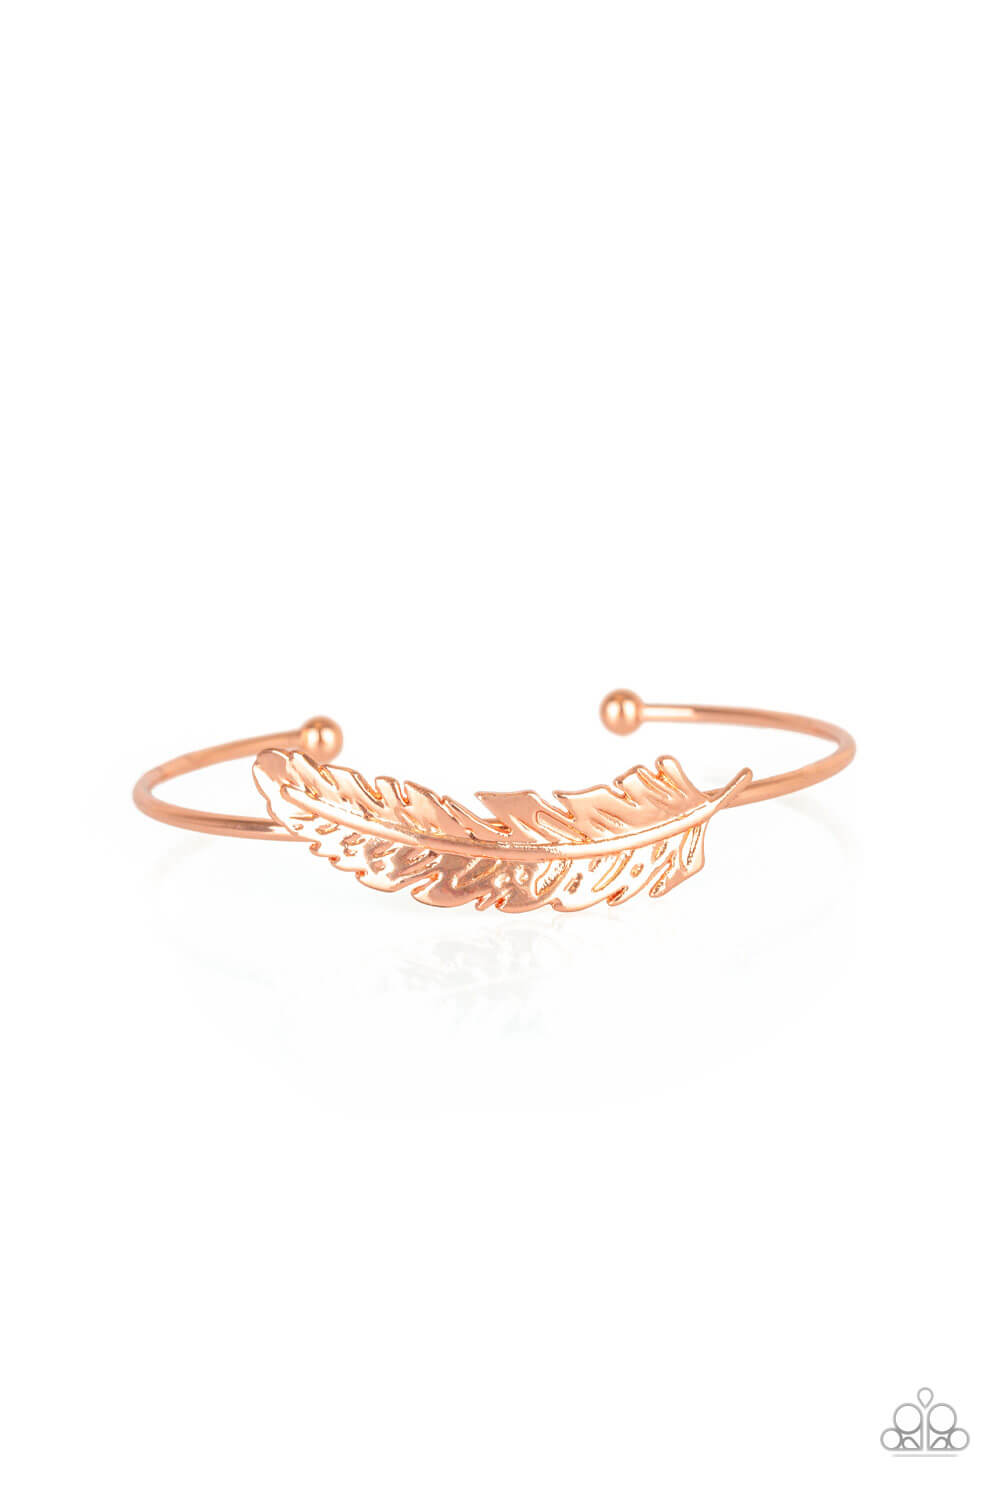 How Do You Like This FEATHER? - Copper Bracelet - Princess Glam Shop